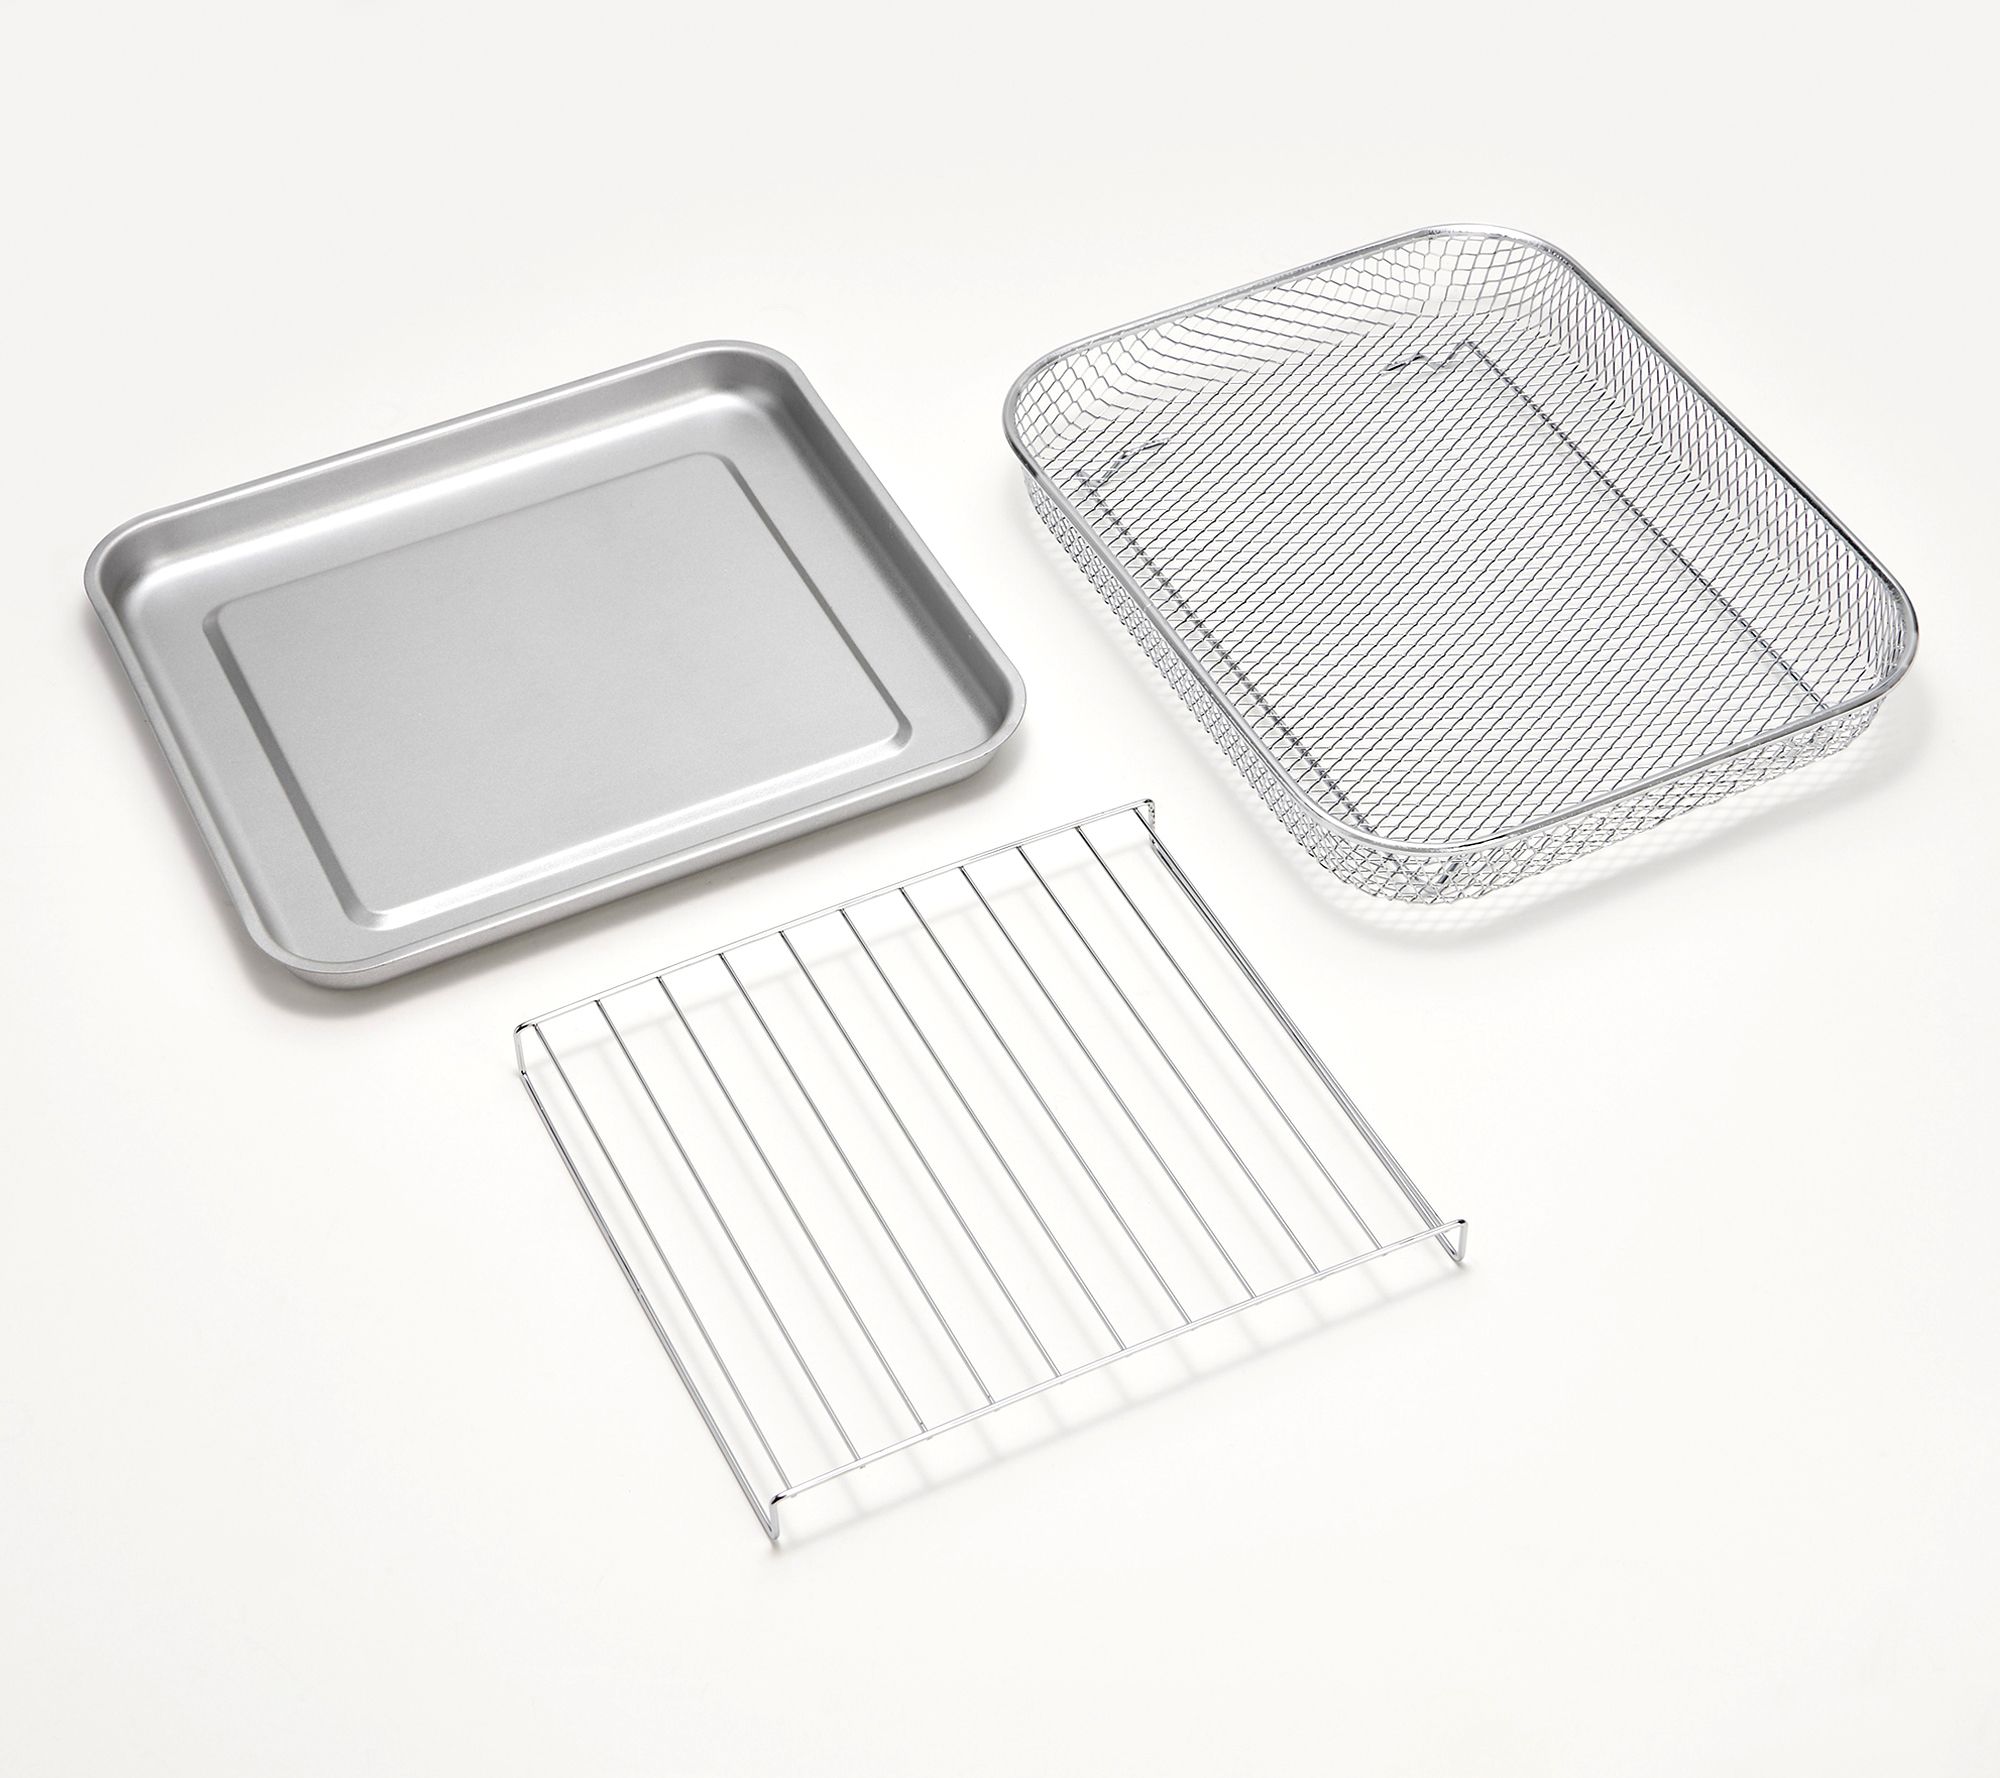 NuWave 12-in. Stainless Steel Everyday Pan with Lid 